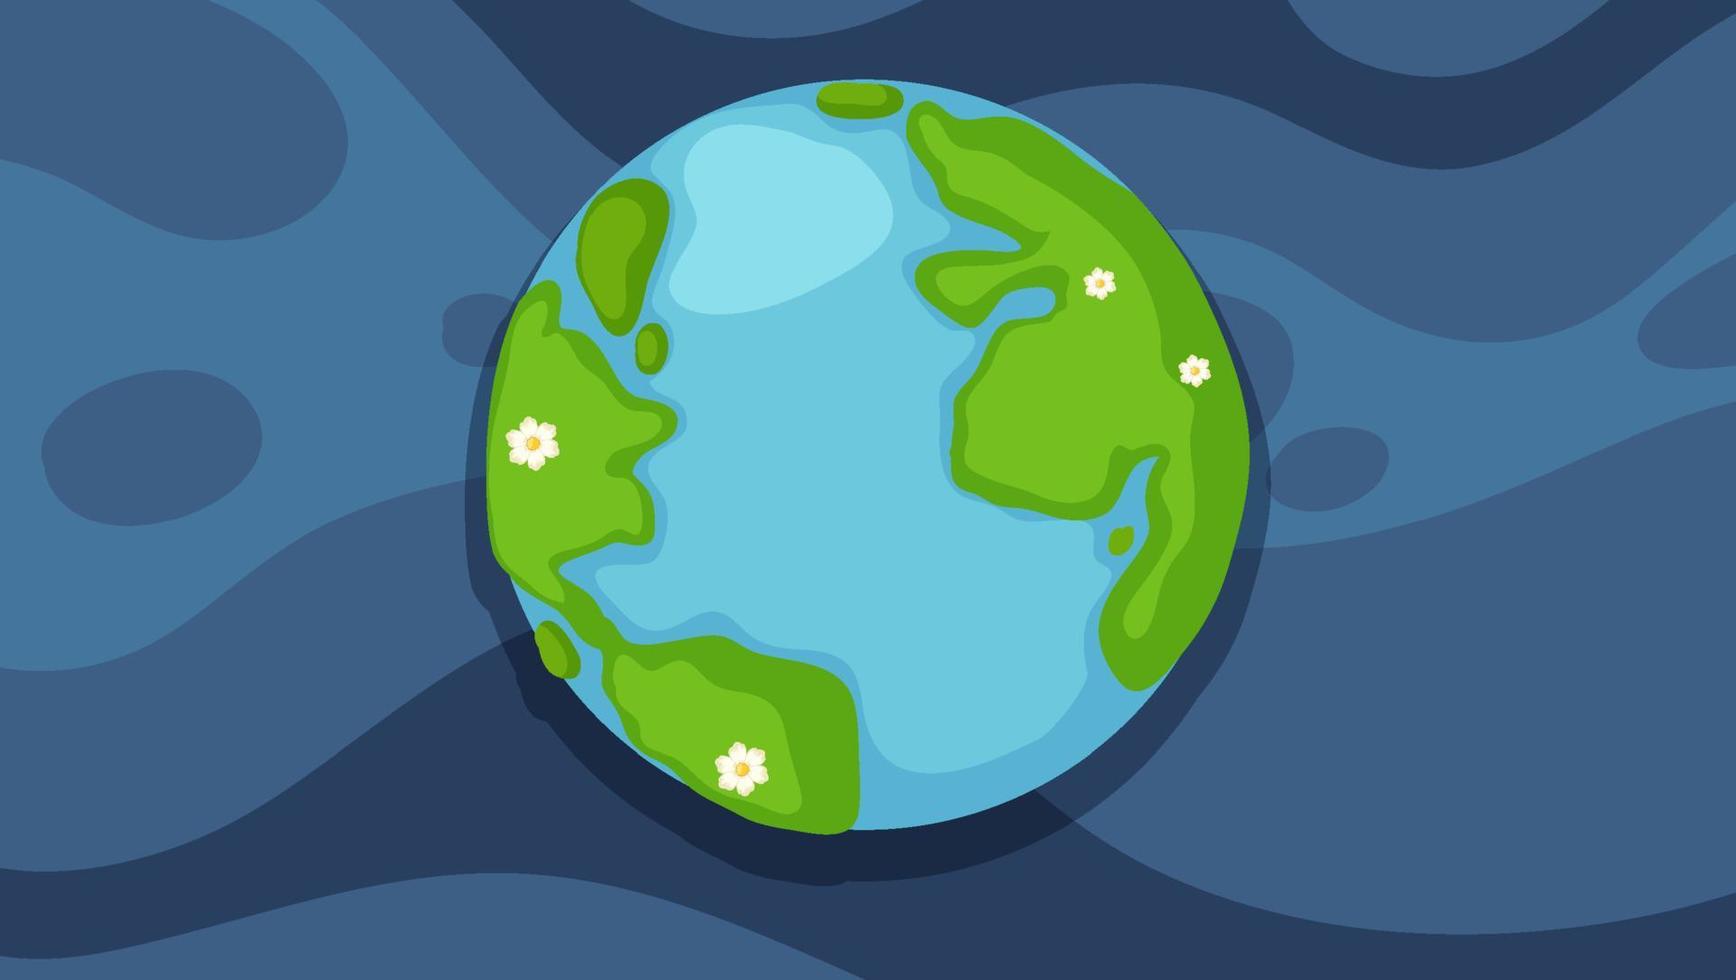 Earth planet in space background in cartoon style vector